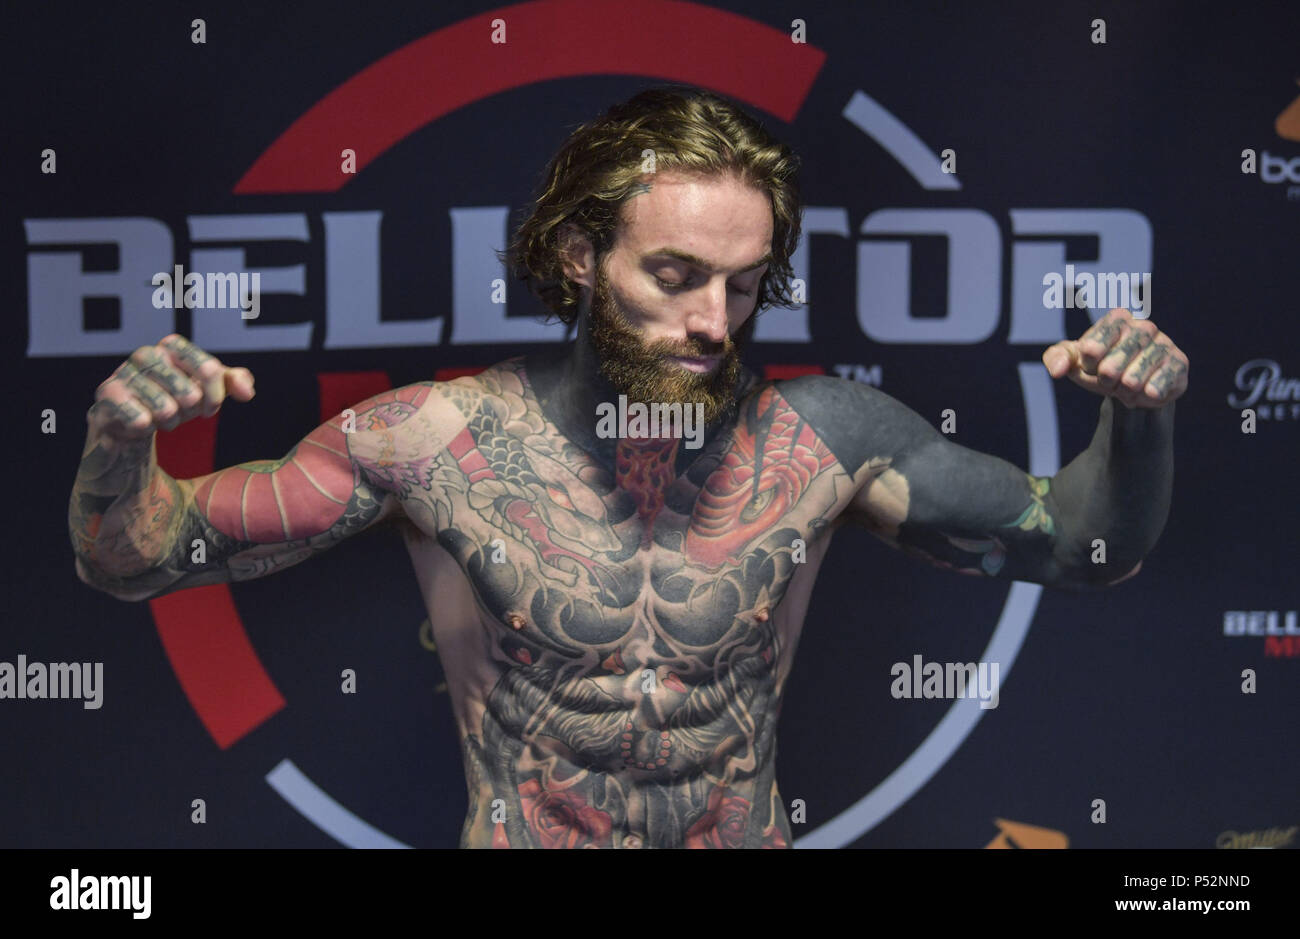 Bellator 200 MMA event weigh-in, London, United Kingdom Featuring: Aaron  Chalmers Where: London, United Kingdom When: 24 May 2018 Credit:  Brightspark Photos/WENN.com Stock Photo - Alamy